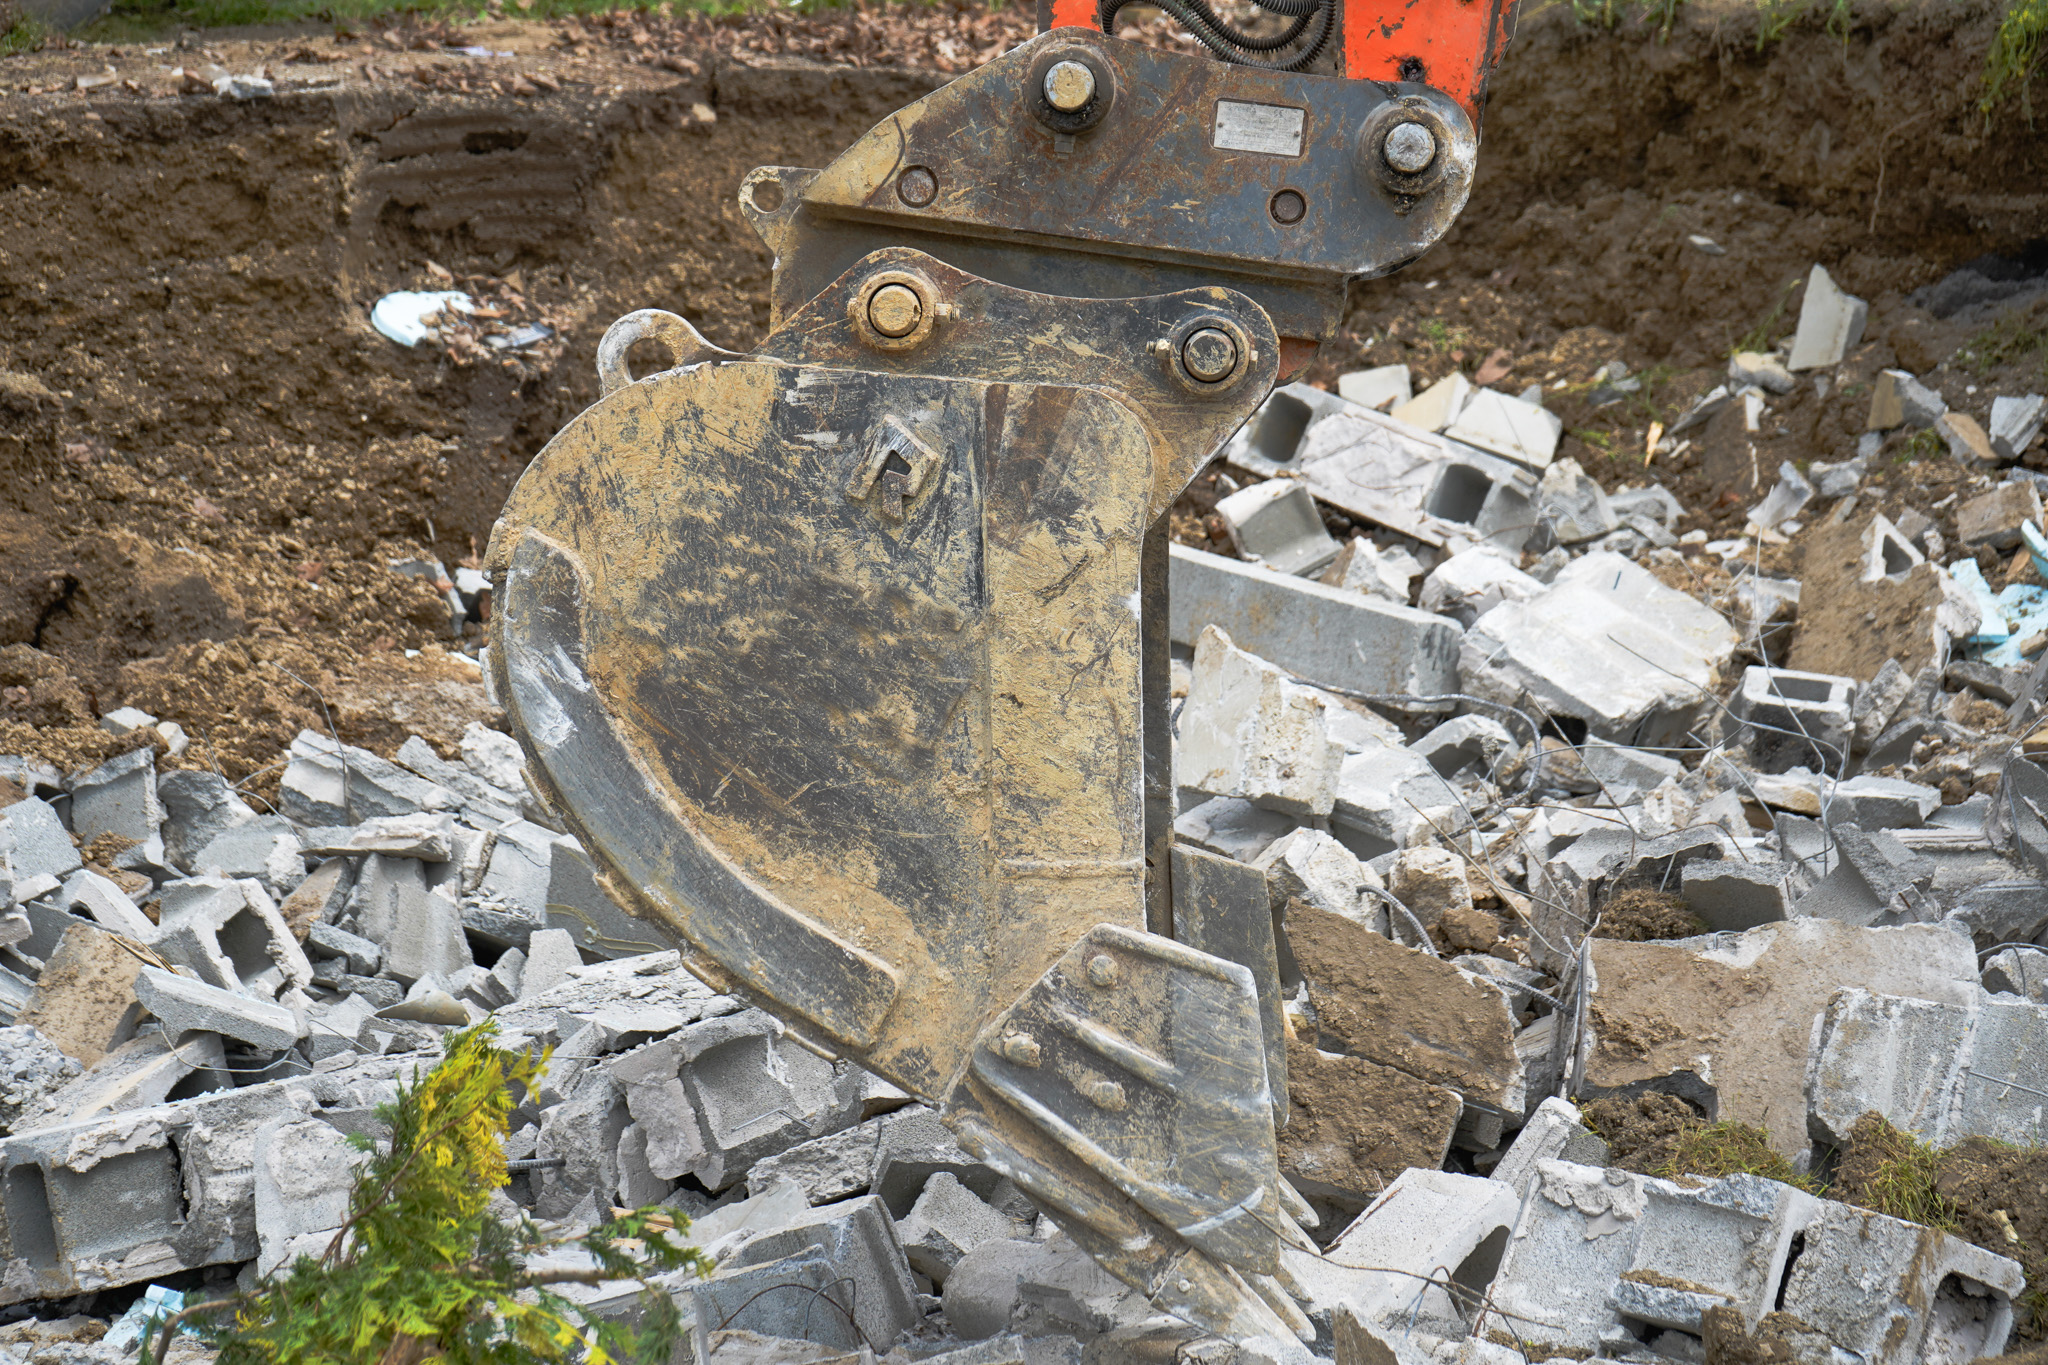 Heavy Duty Excavator Bucket for sale Scooping Stone - Rockland Manufacturing